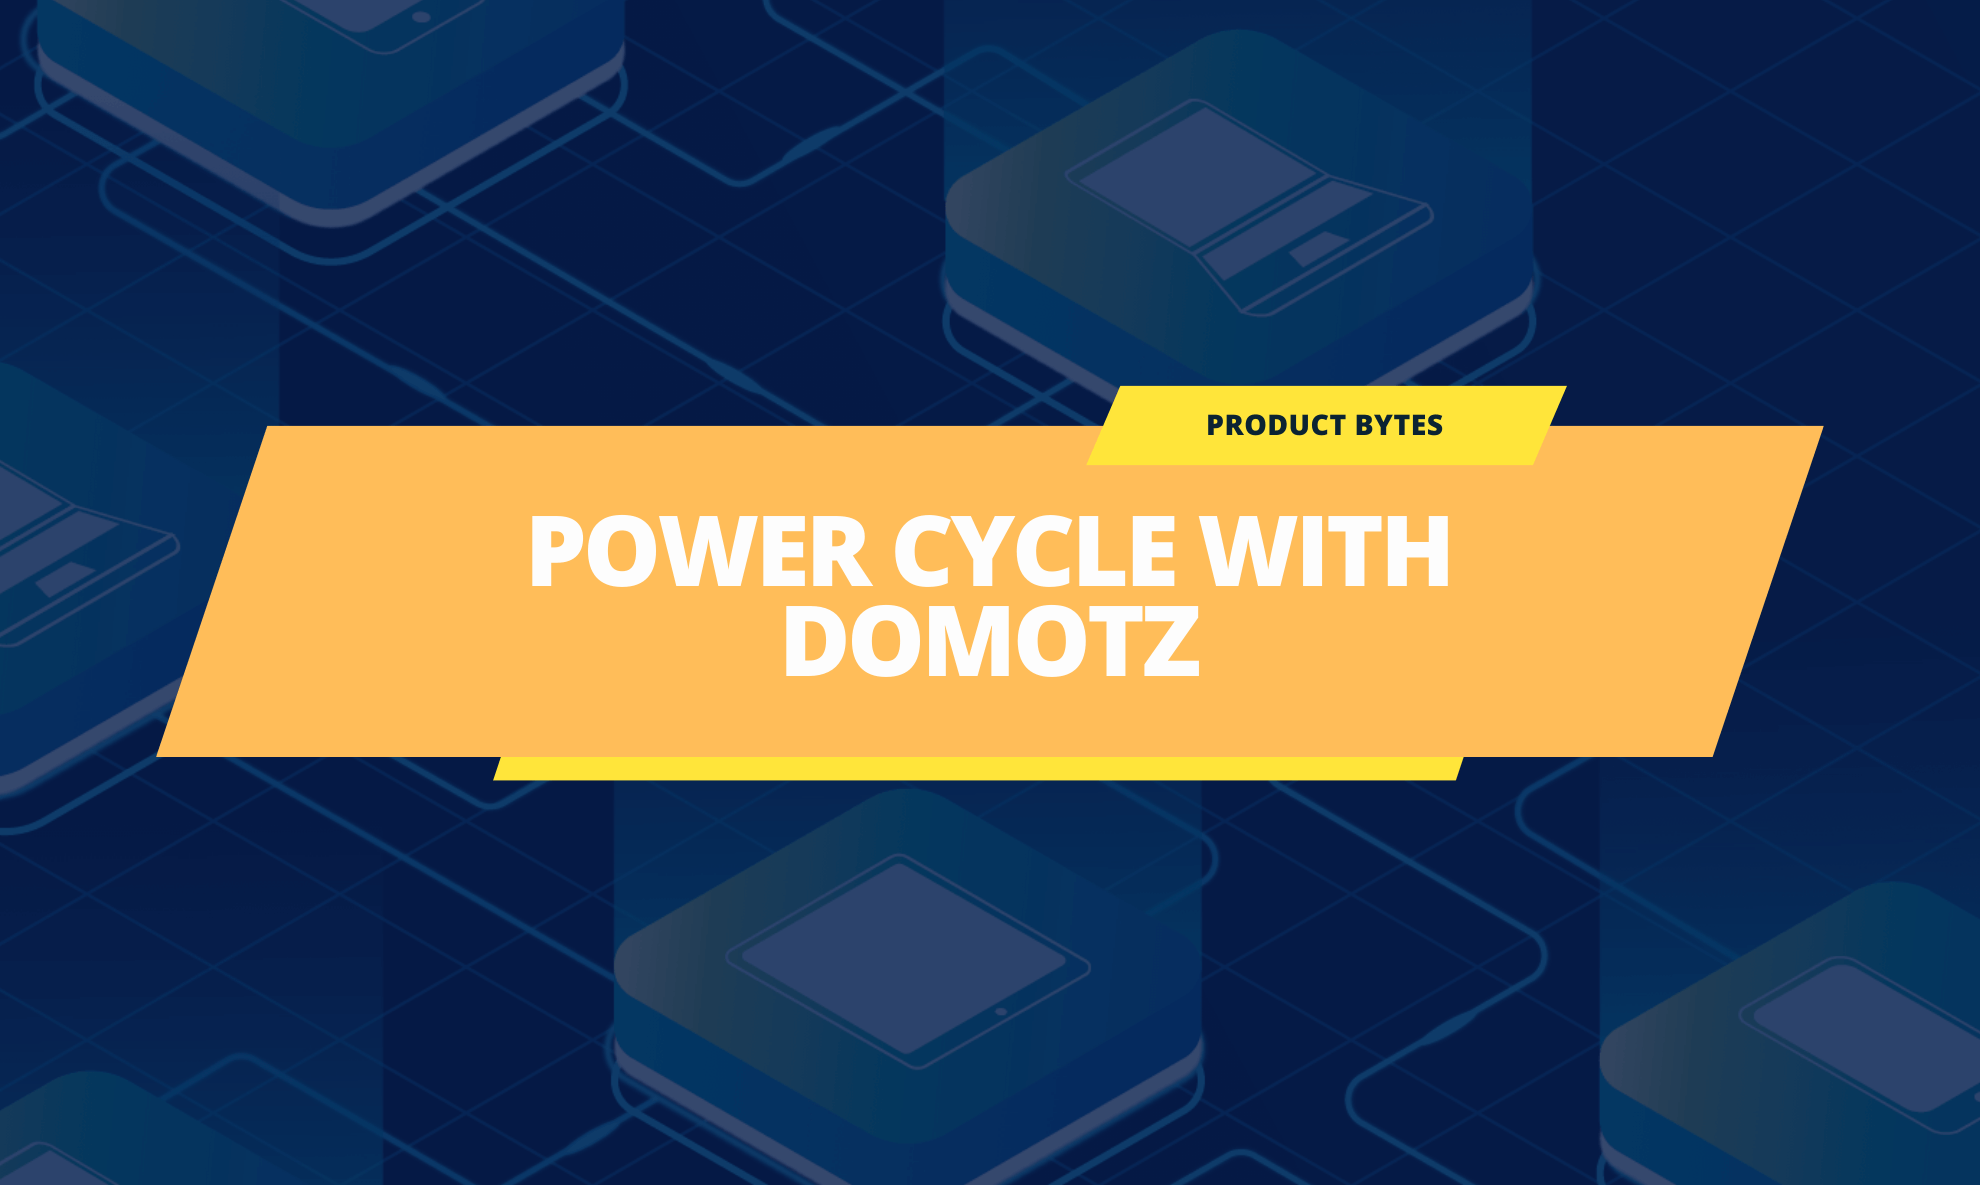 4 Easy Steps to Power Cycle Directly in Domotz